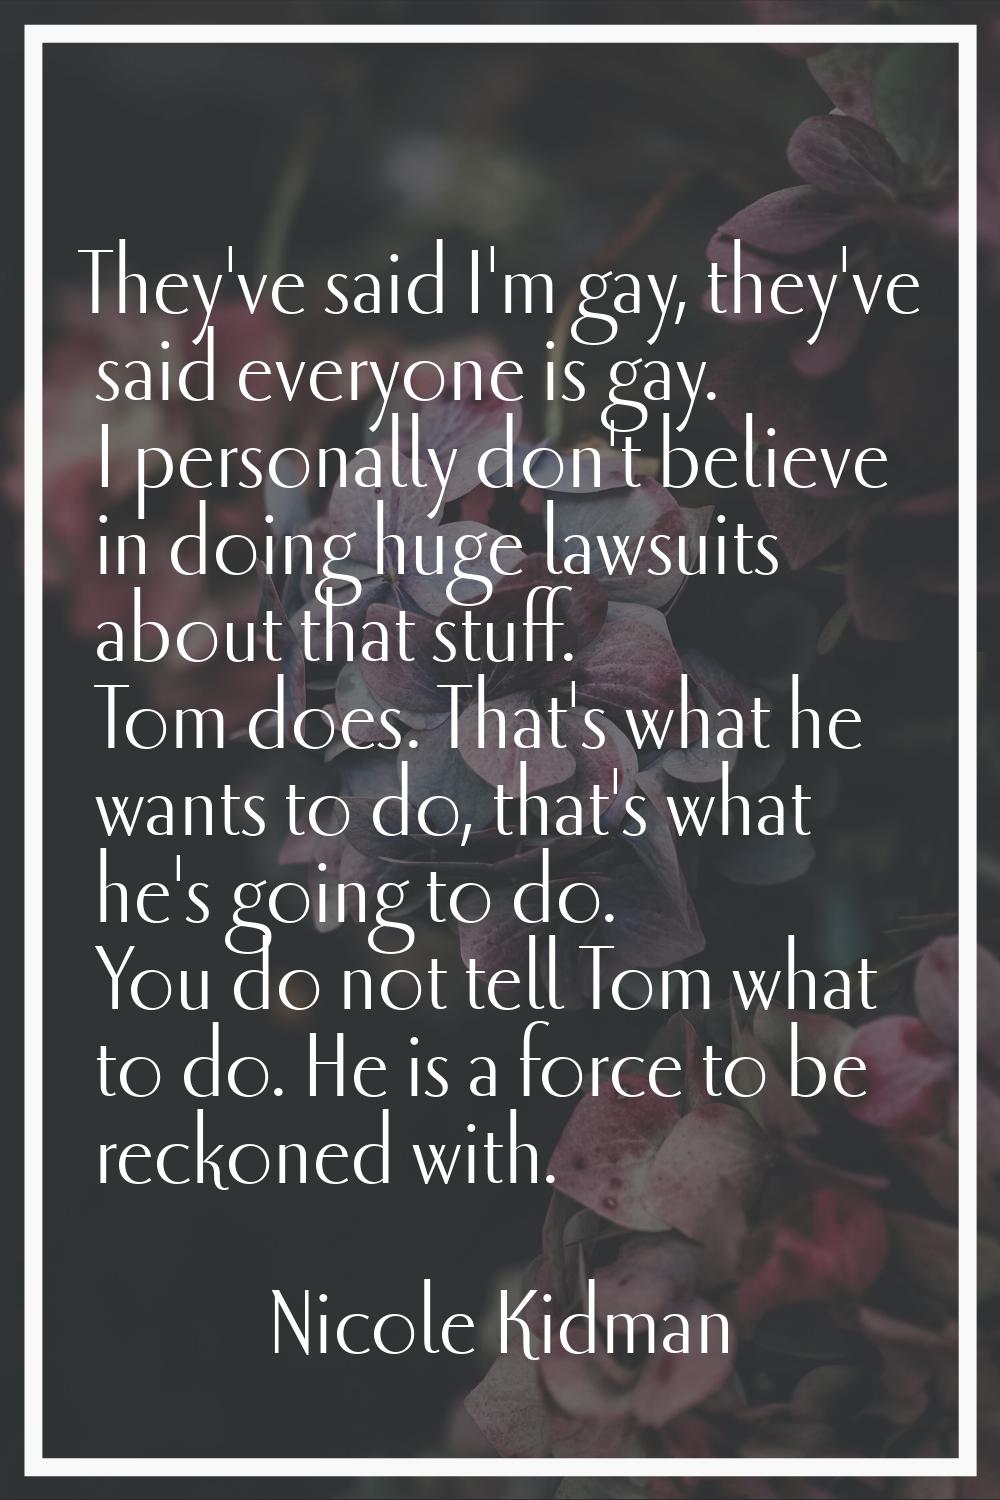 They've said I'm gay, they've said everyone is gay. I personally don't believe in doing huge lawsui